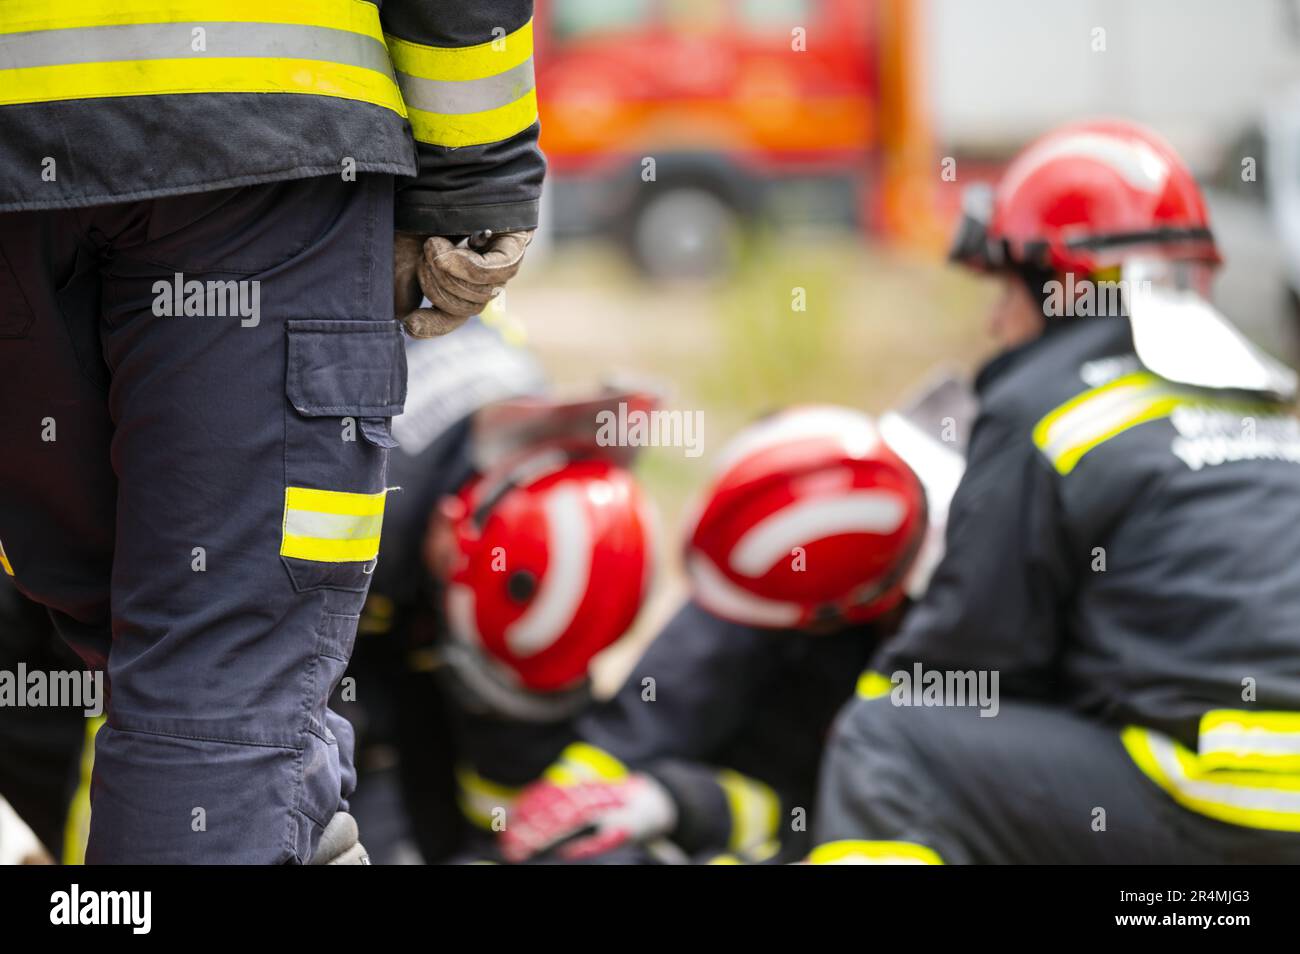 Car Crash Traffic Accident. Firefighters Rescue Injured Trapped Victims. Firemen give First Aid to passengers. High quality photography. Stock Photo